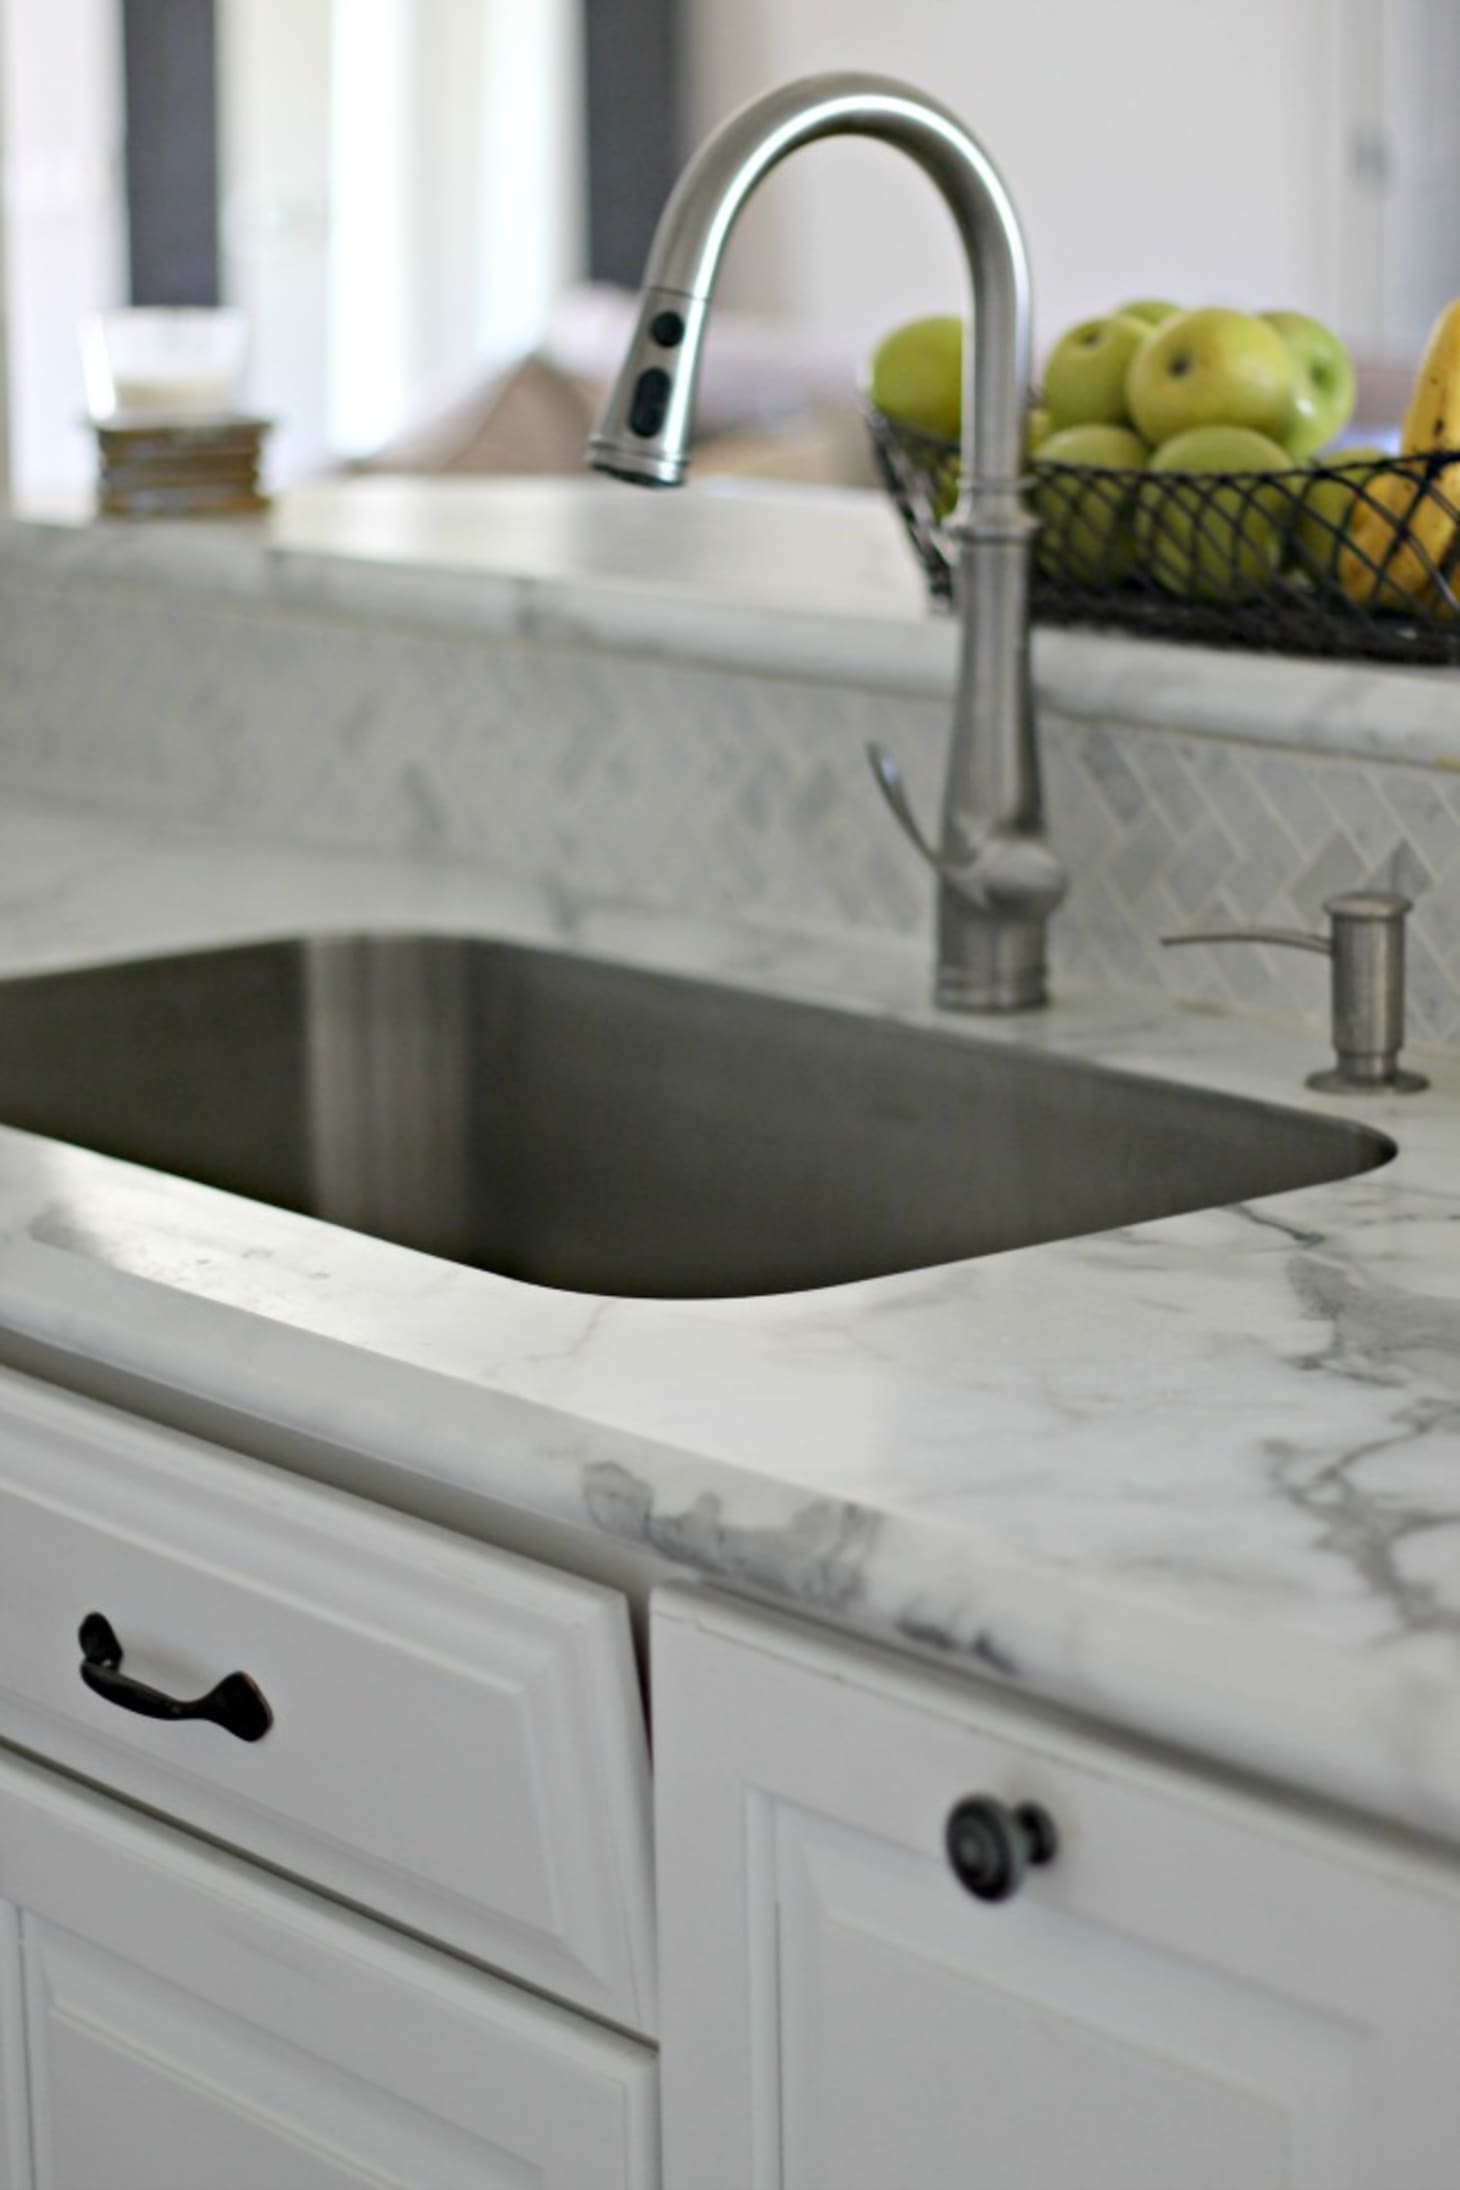 Laminate Countertops That Are Stylish And Affordable